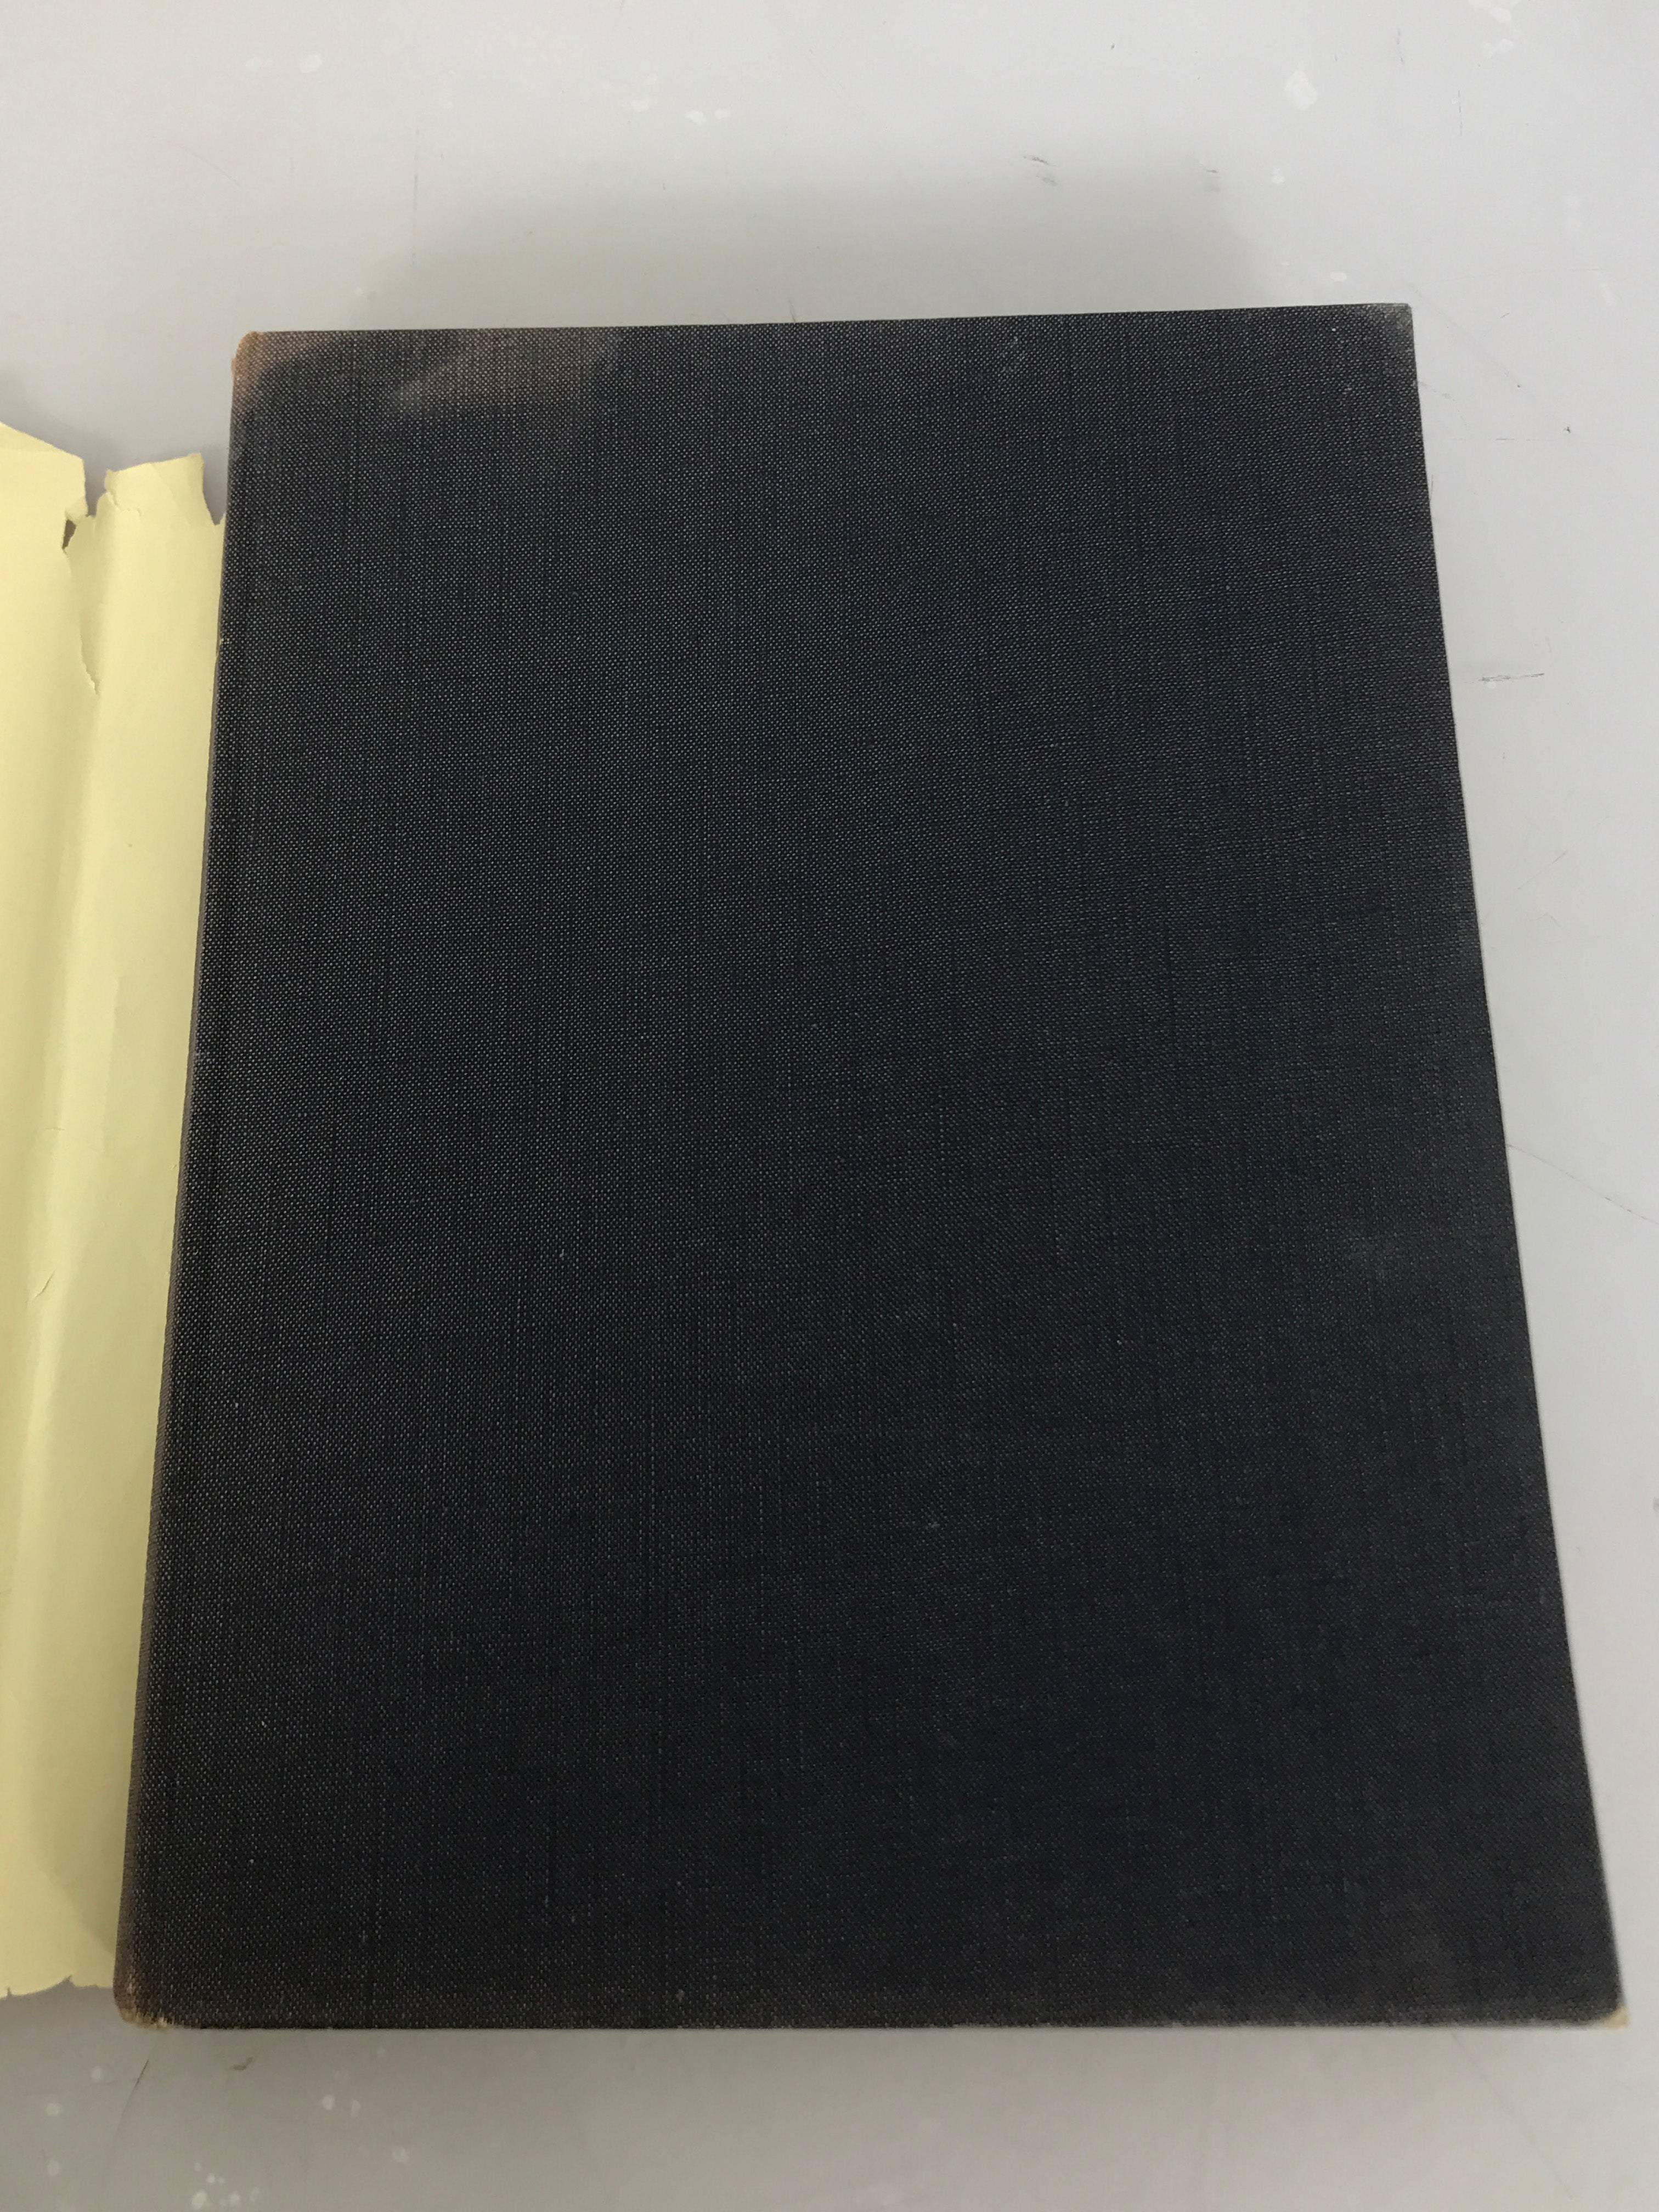 The Vestibular Nuclei and their Connections, Anatomy and Functional Correlations by Brodal, Pompeiano, and Walberg 1962 First Edition HC DJ